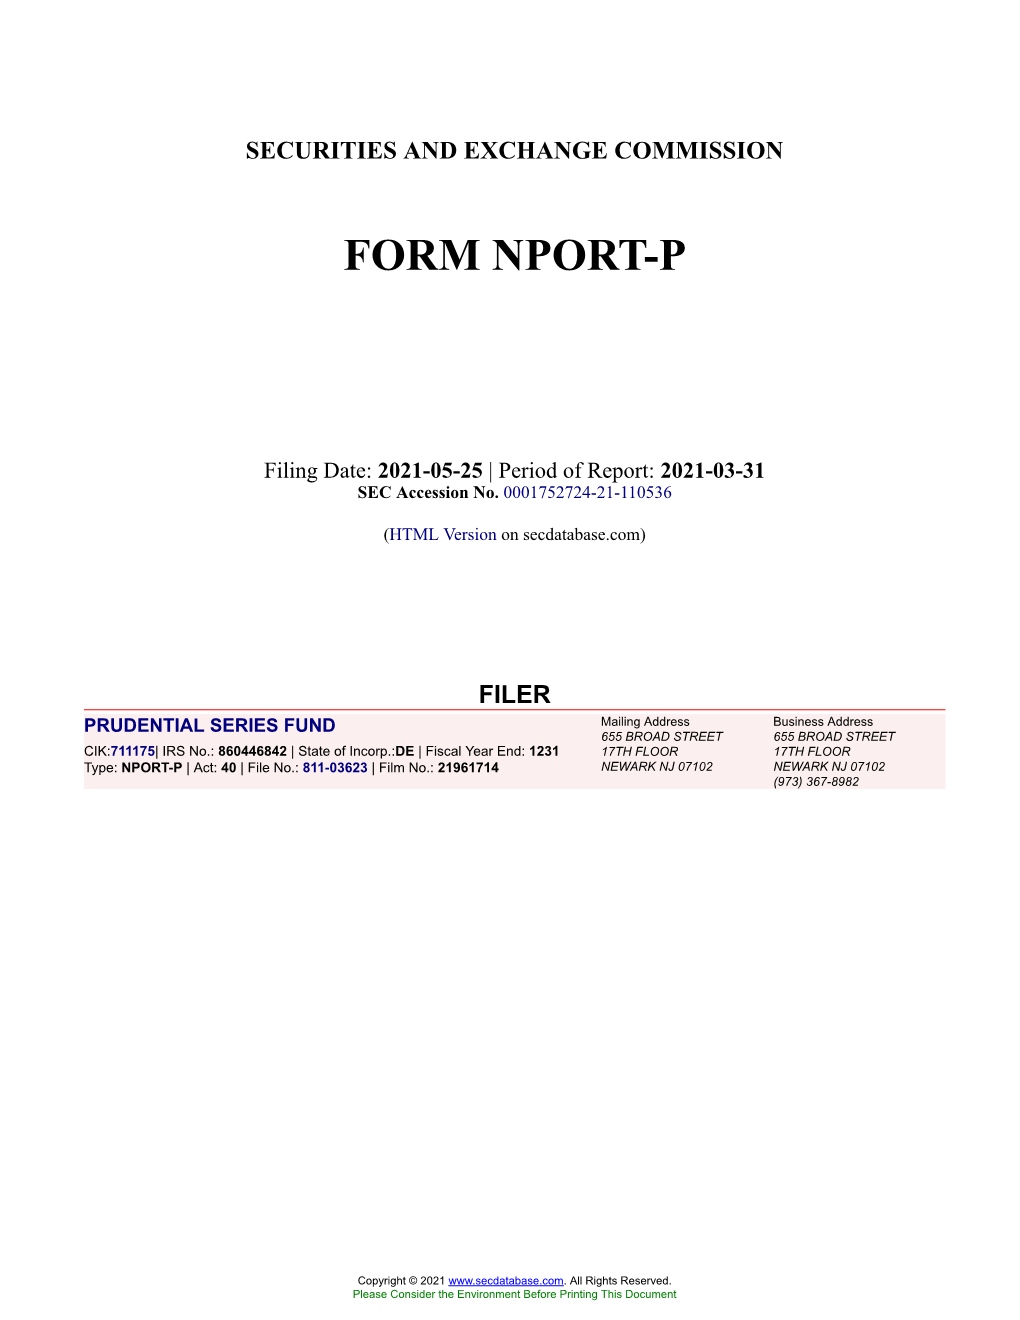 PRUDENTIAL SERIES FUND Form NPORT-P Filed